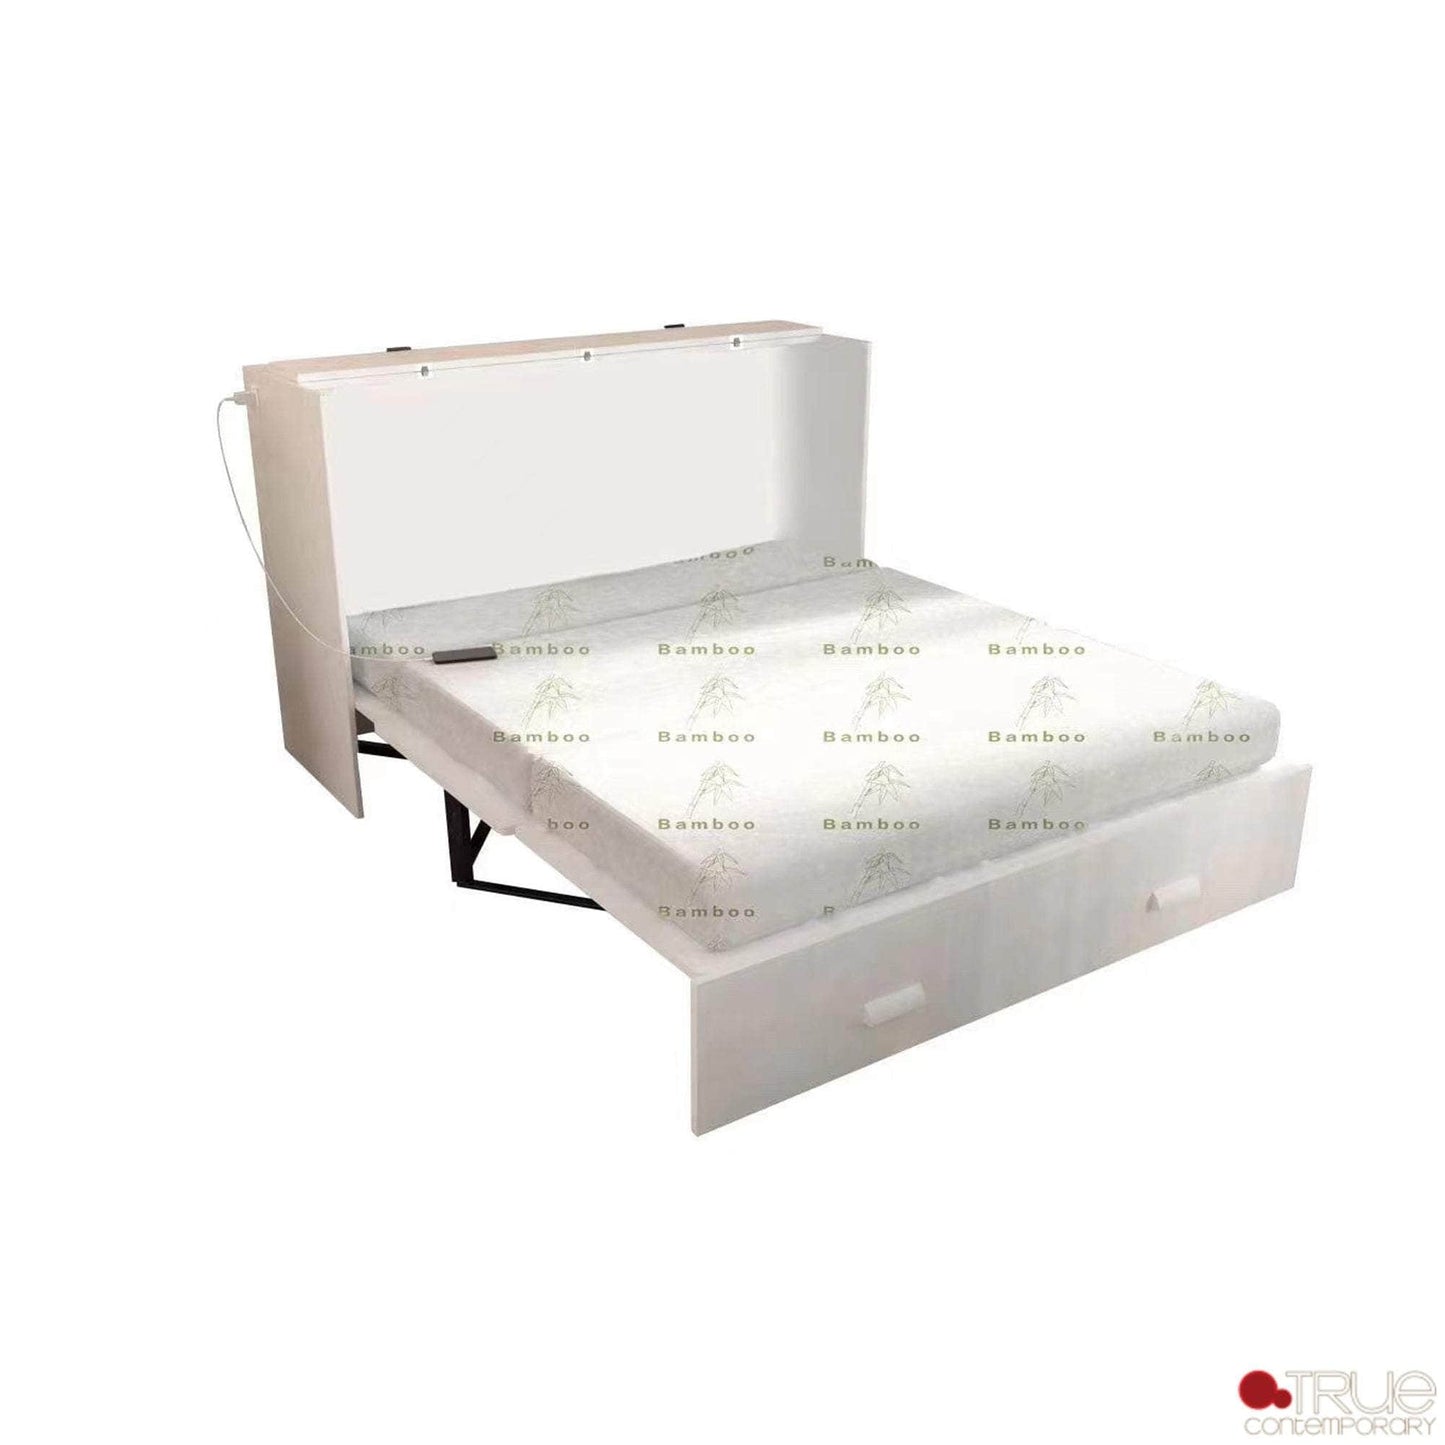 True Contemporary Murphy Cabinet Bed Hyde White Murphy Cabinet Bed with Gel Memory Foam Mattress - Available in 4 Sizes